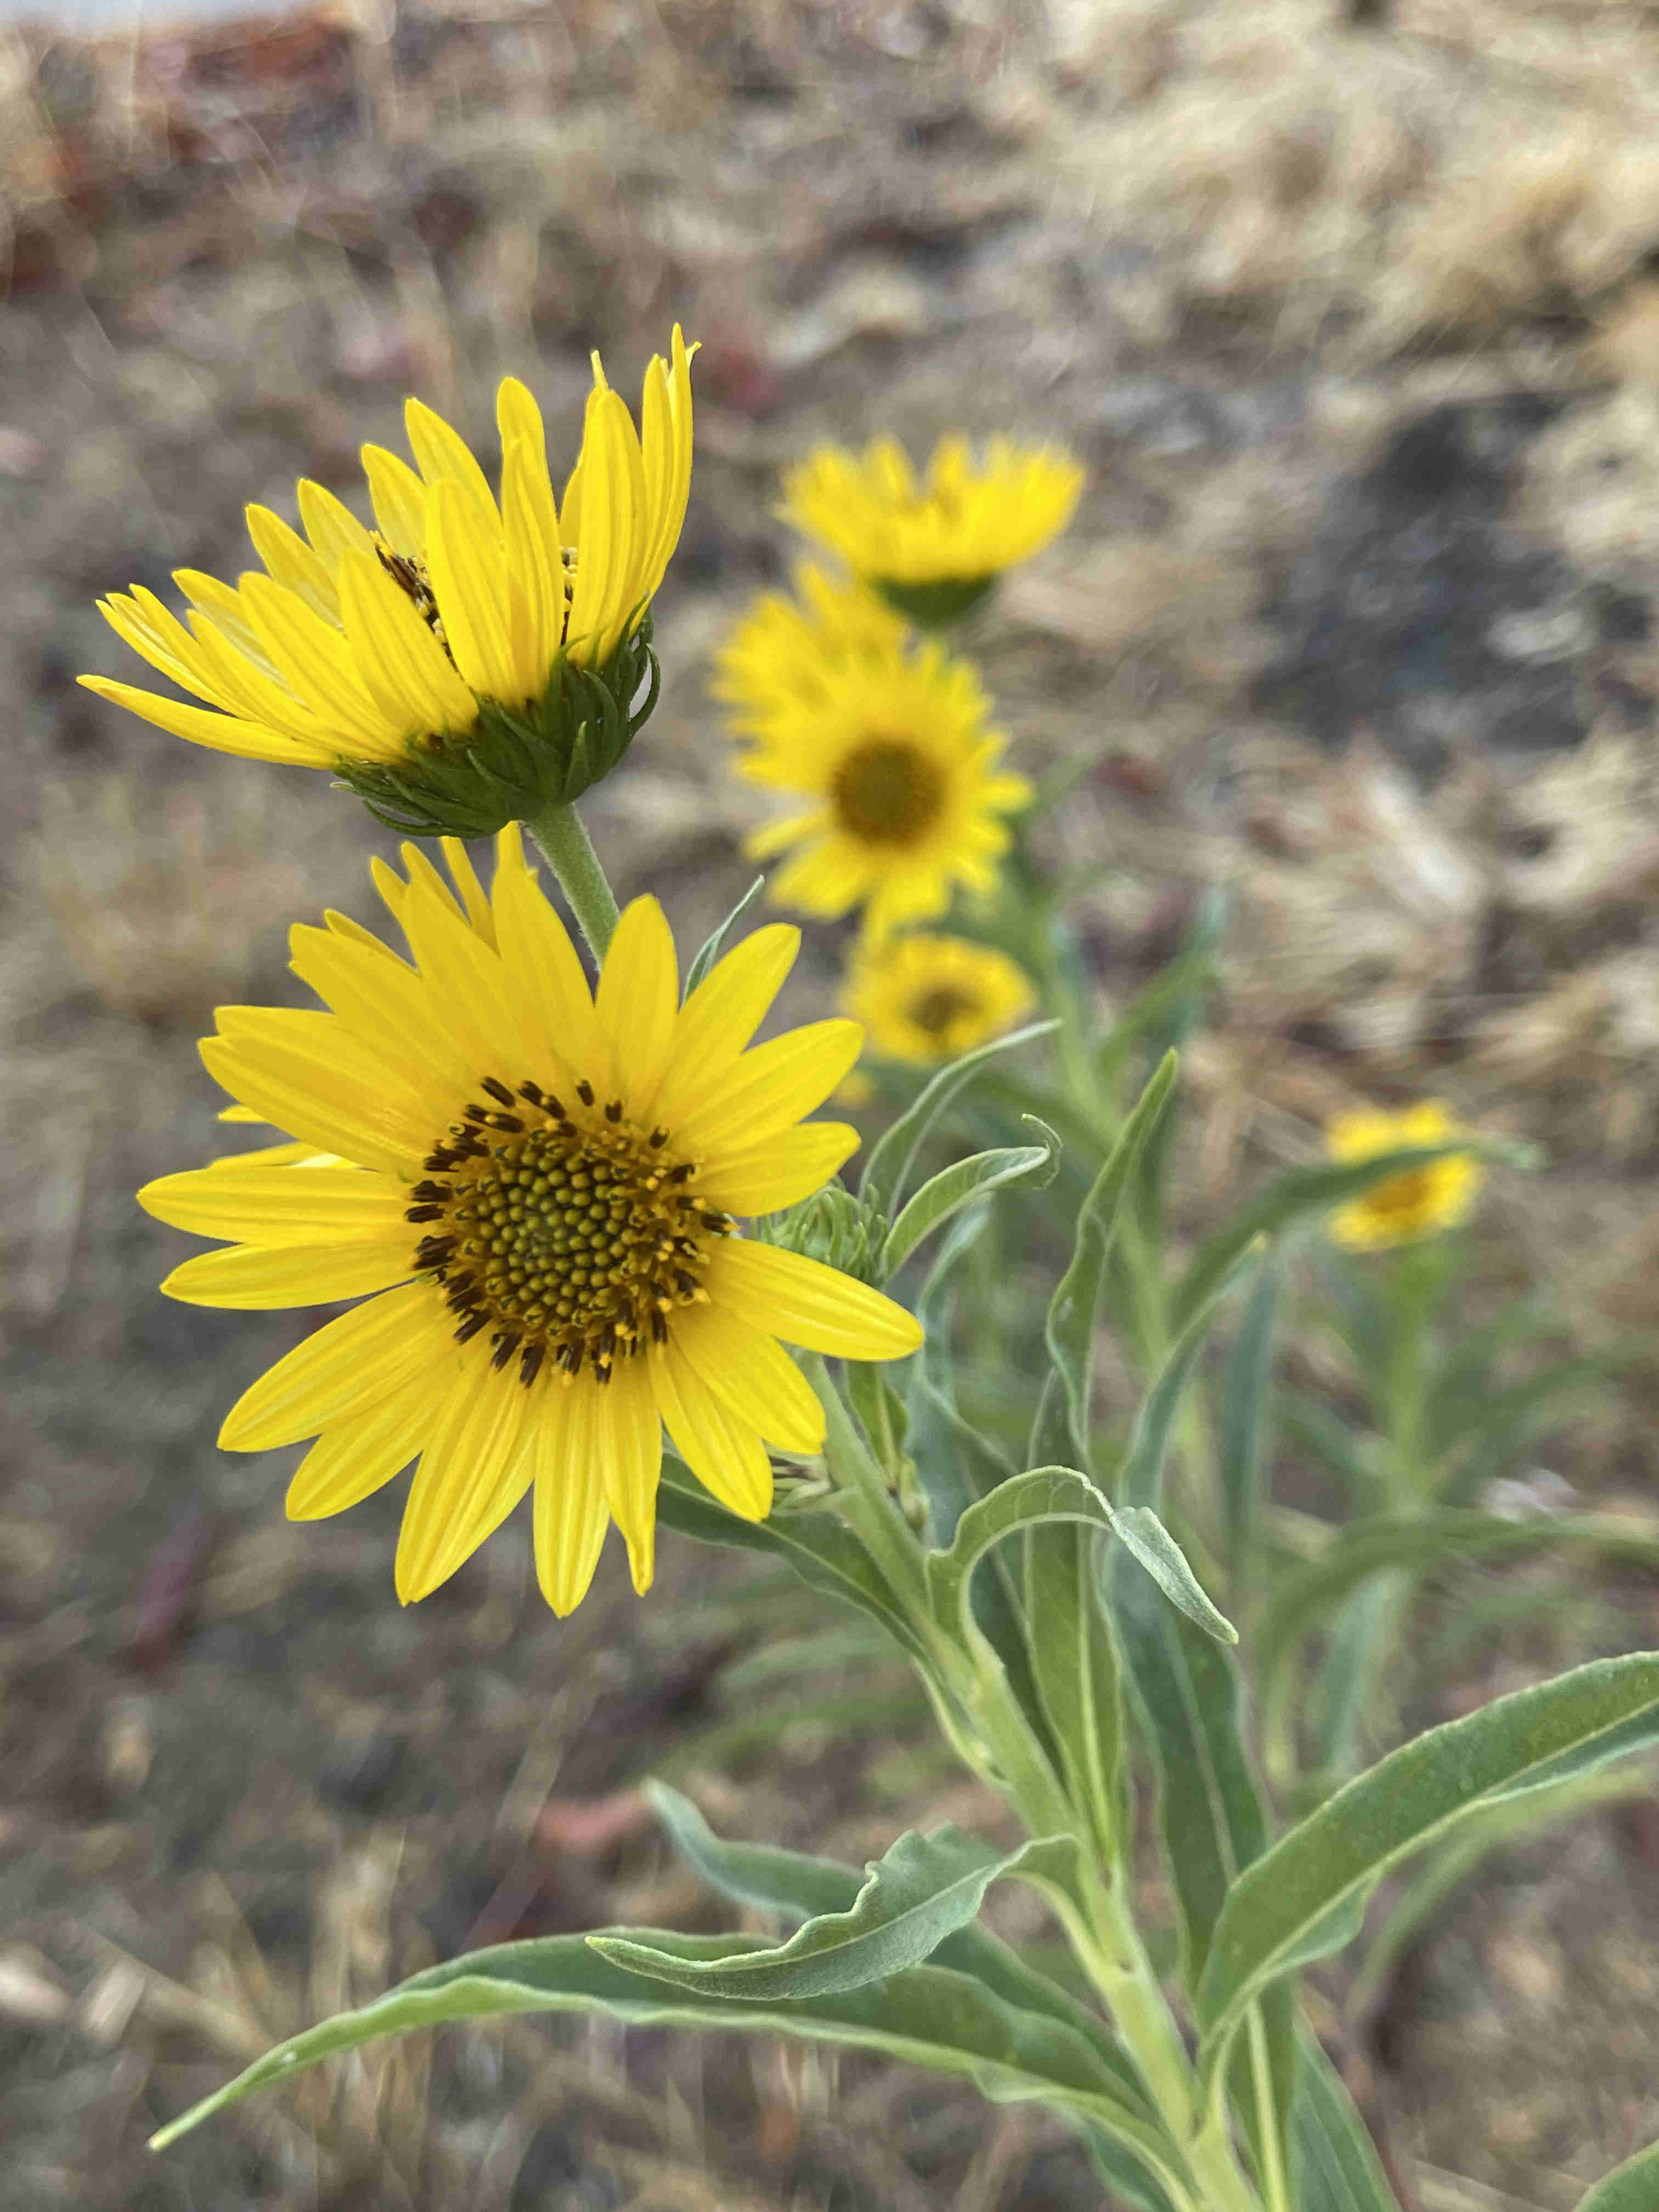 Yellow native California sunflowers blooming. They have long thin green leaves.